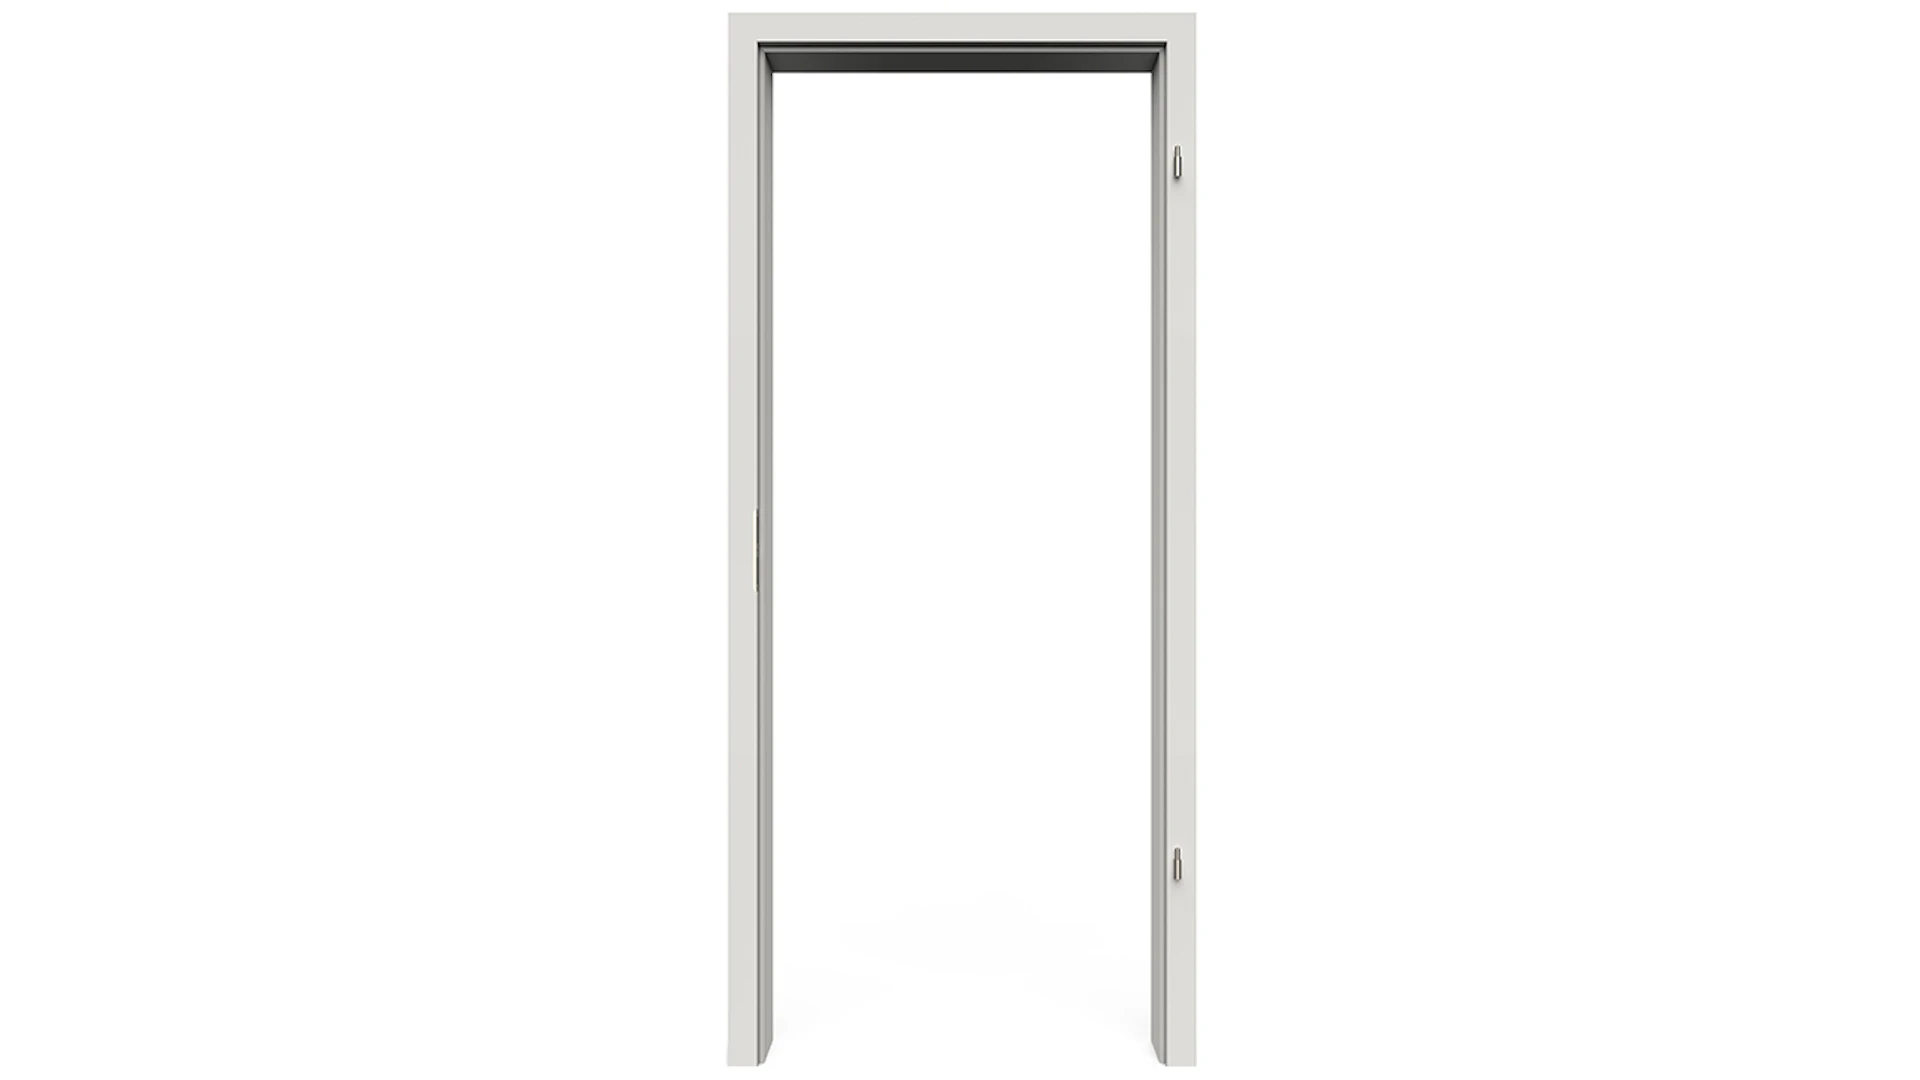 planeo Standard frame, rounded edge - CPL Pearl white - 1985 x 610 x 260 mm DIN right